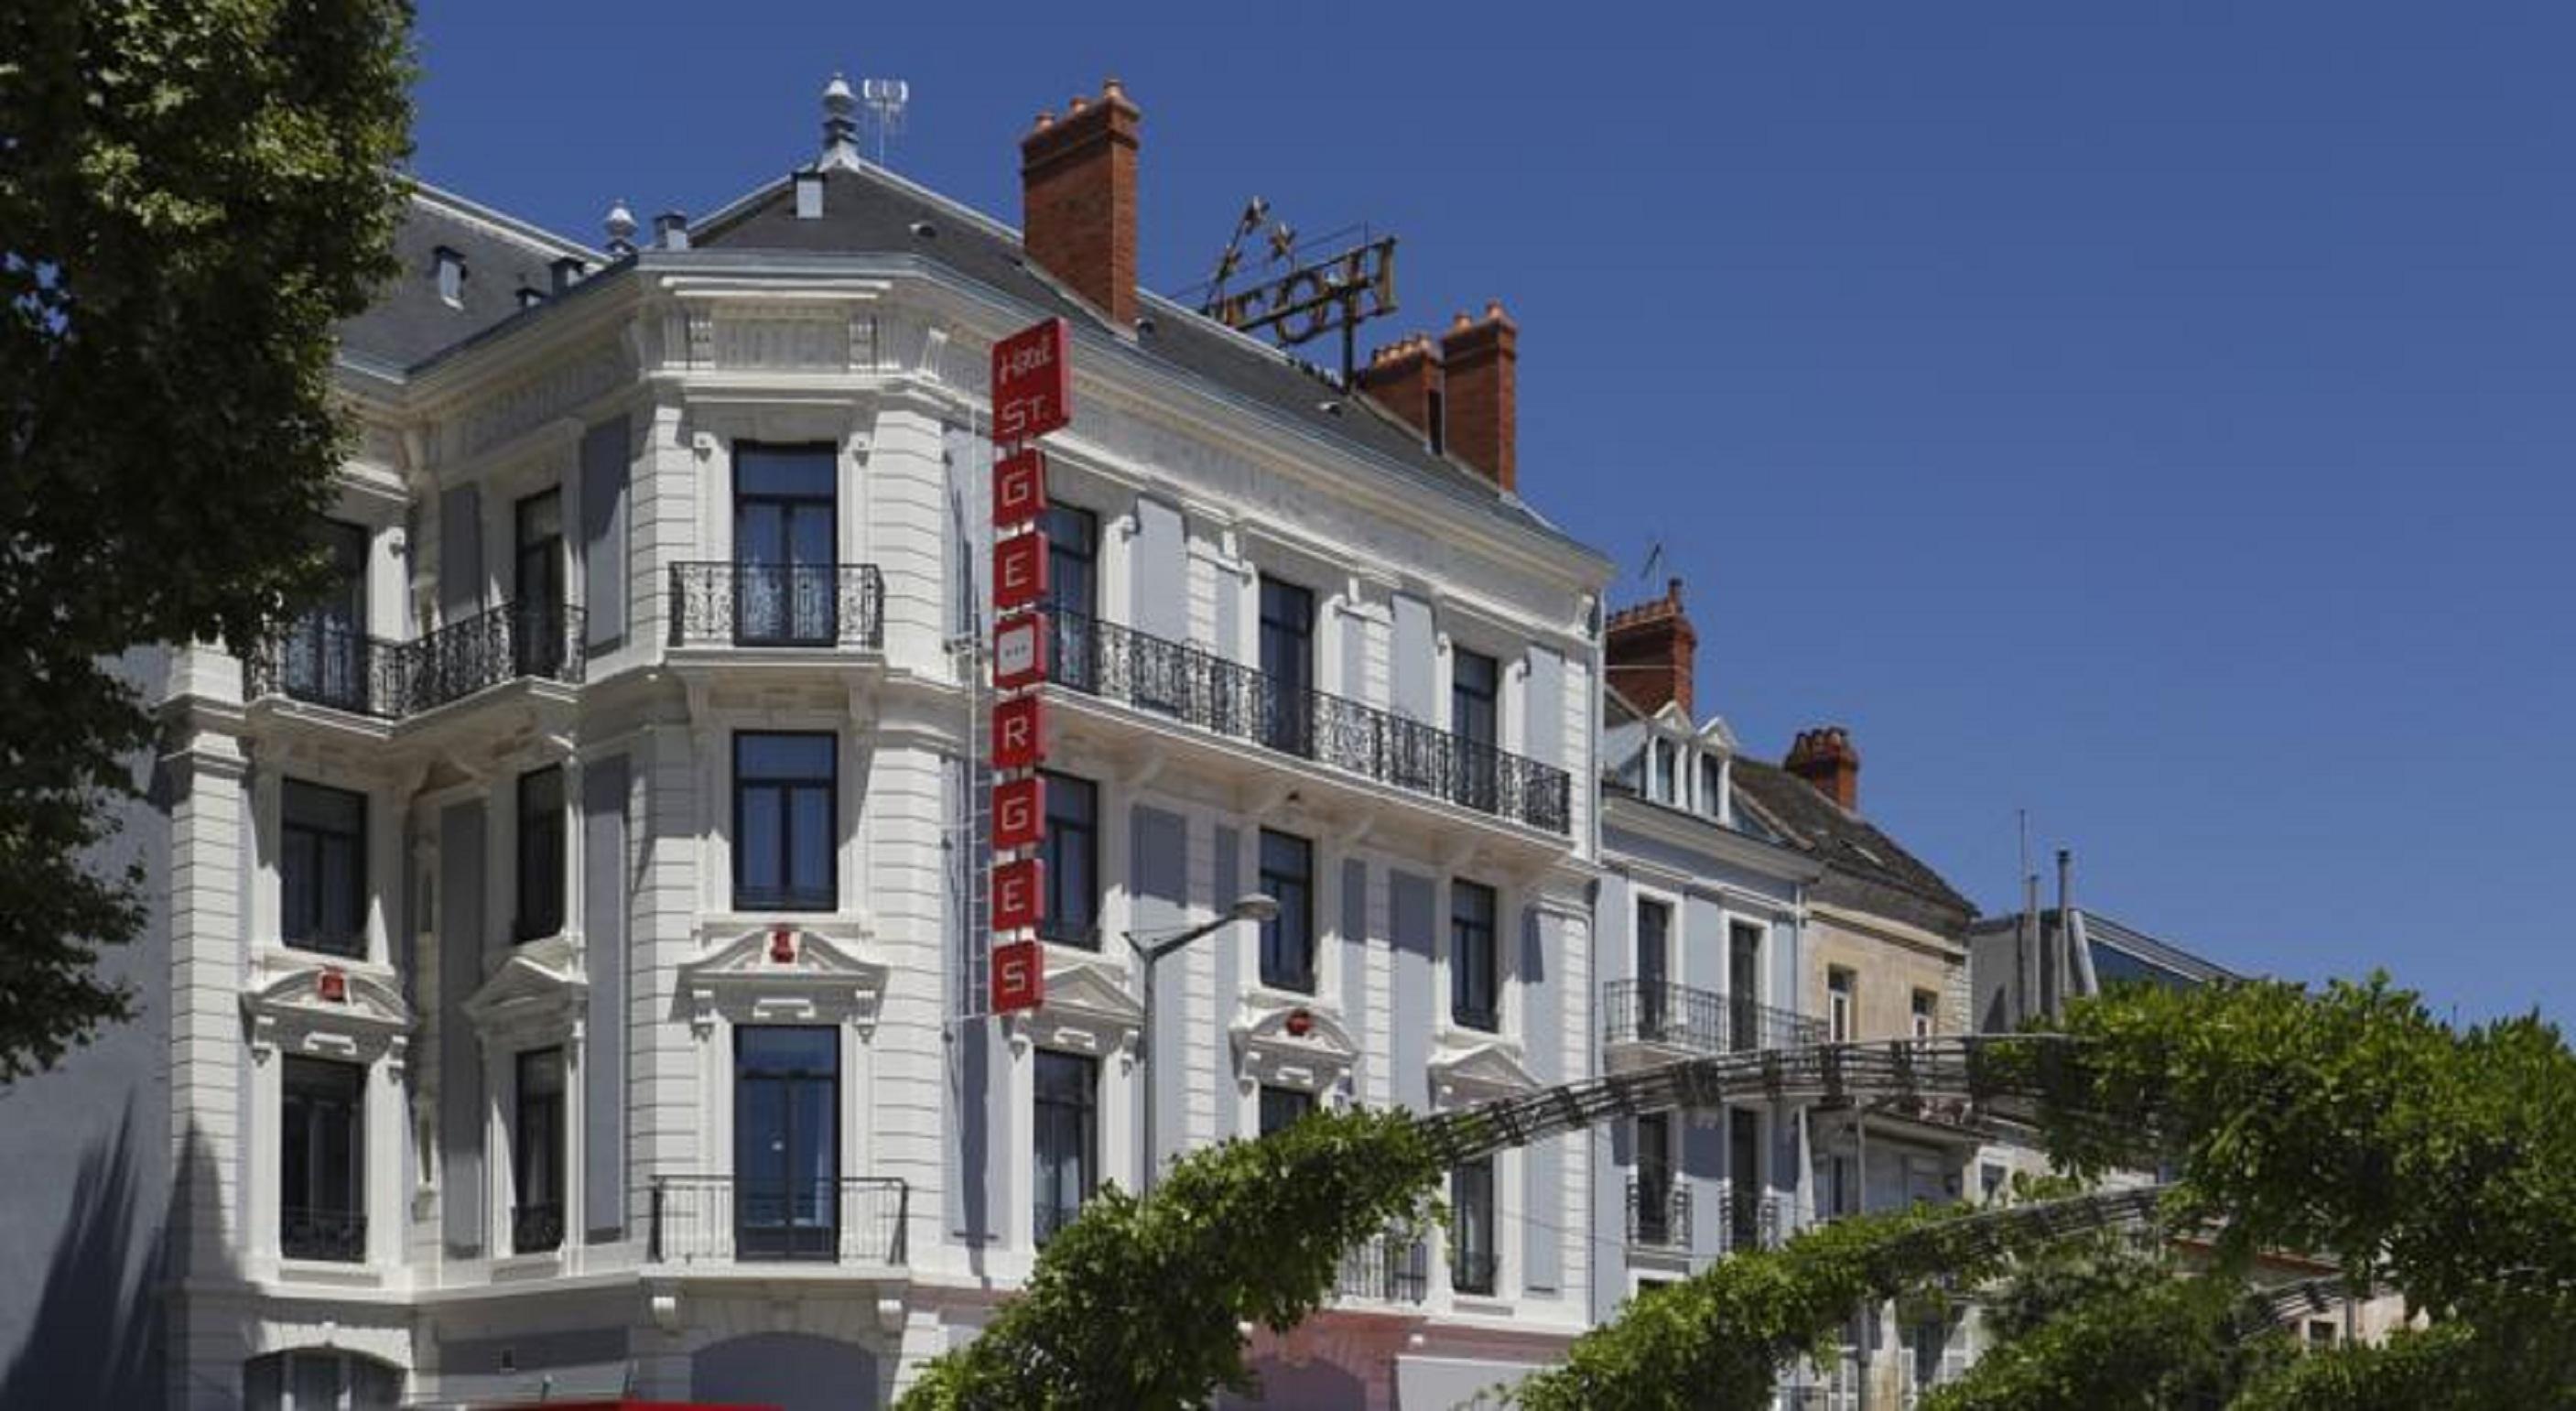 HOTEL SAINT GEORGES in CHALON SUR SAONE, France